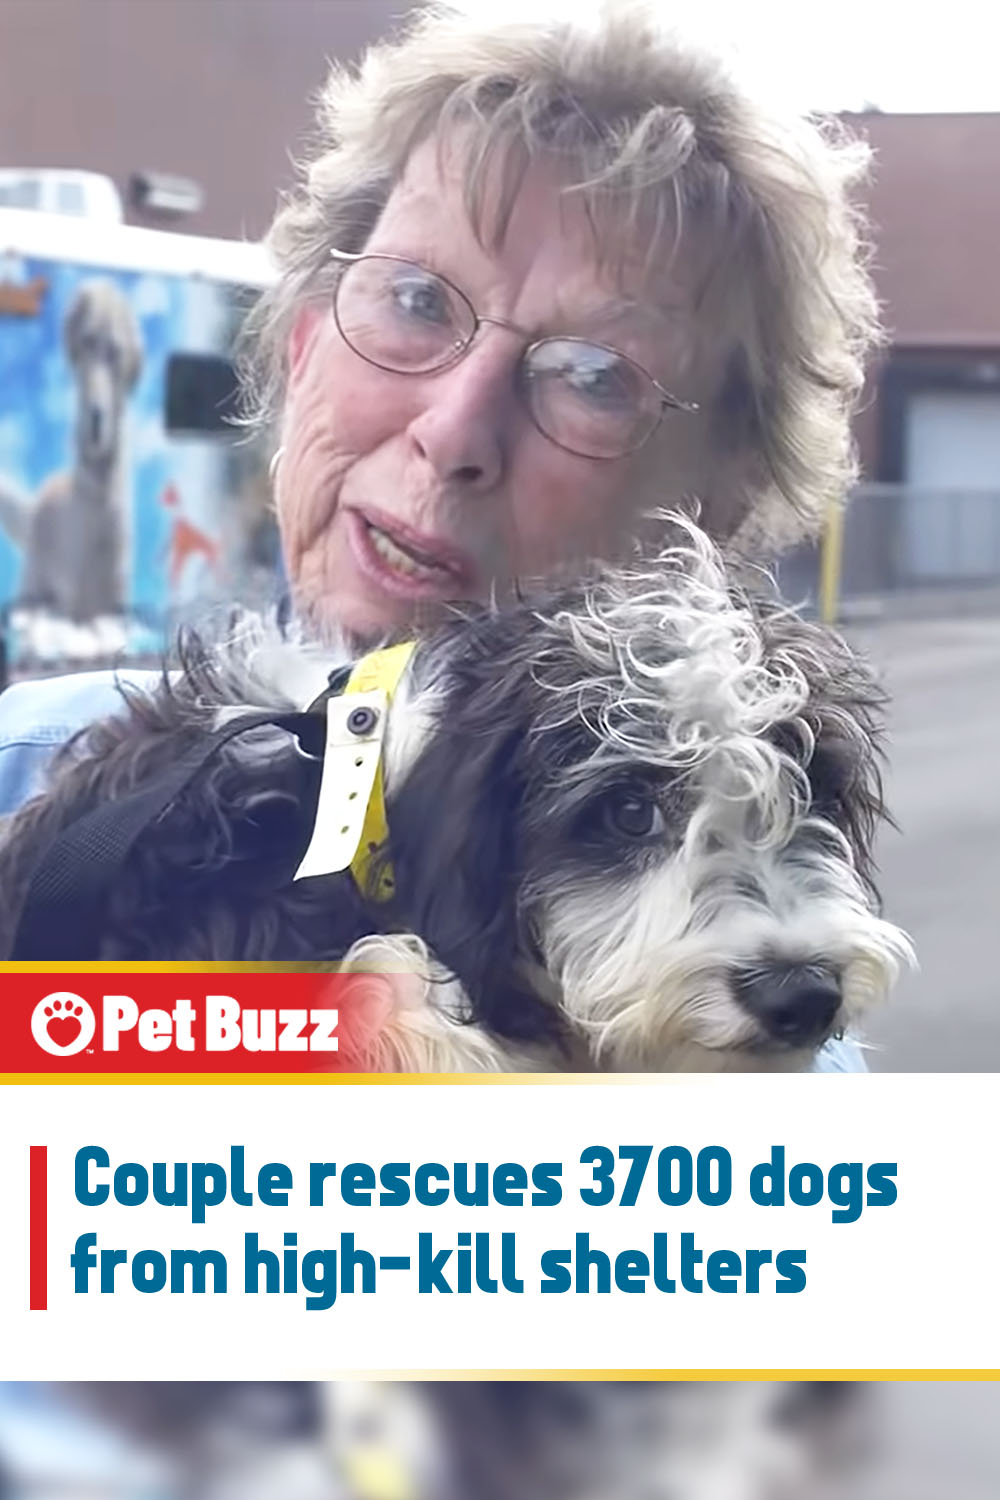 Couple rescues 3700 dogs from high-kill shelters